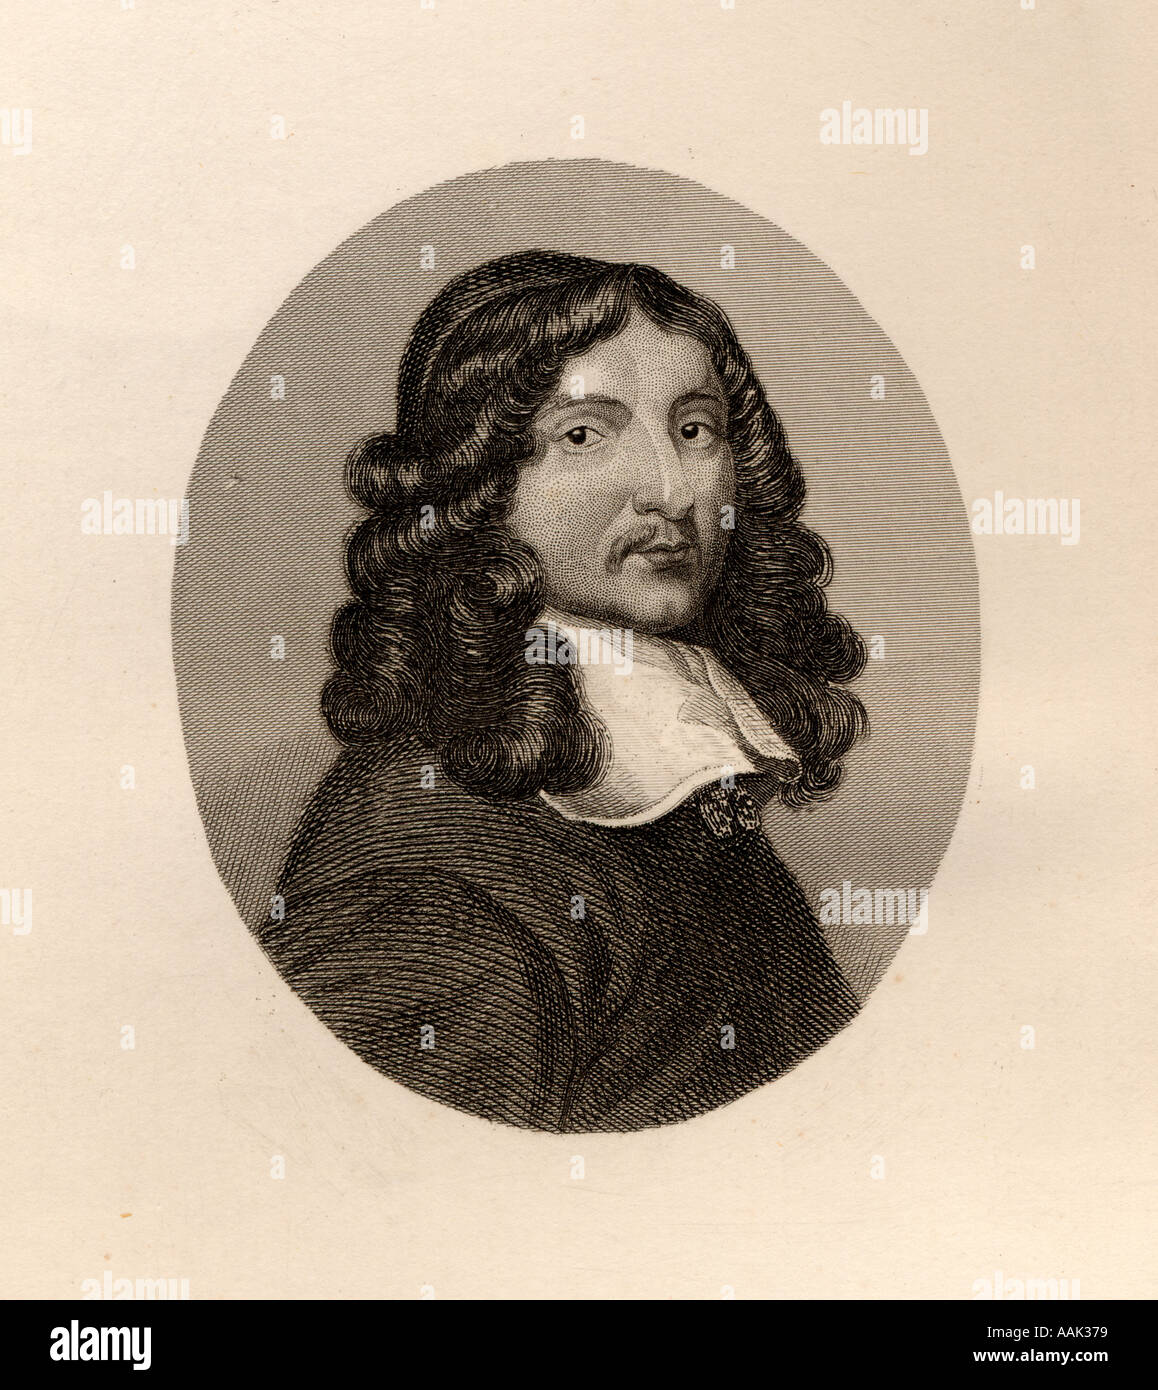 Andrew Marvell, 1621 - 1678. English metaphysical poet. Stock Photo